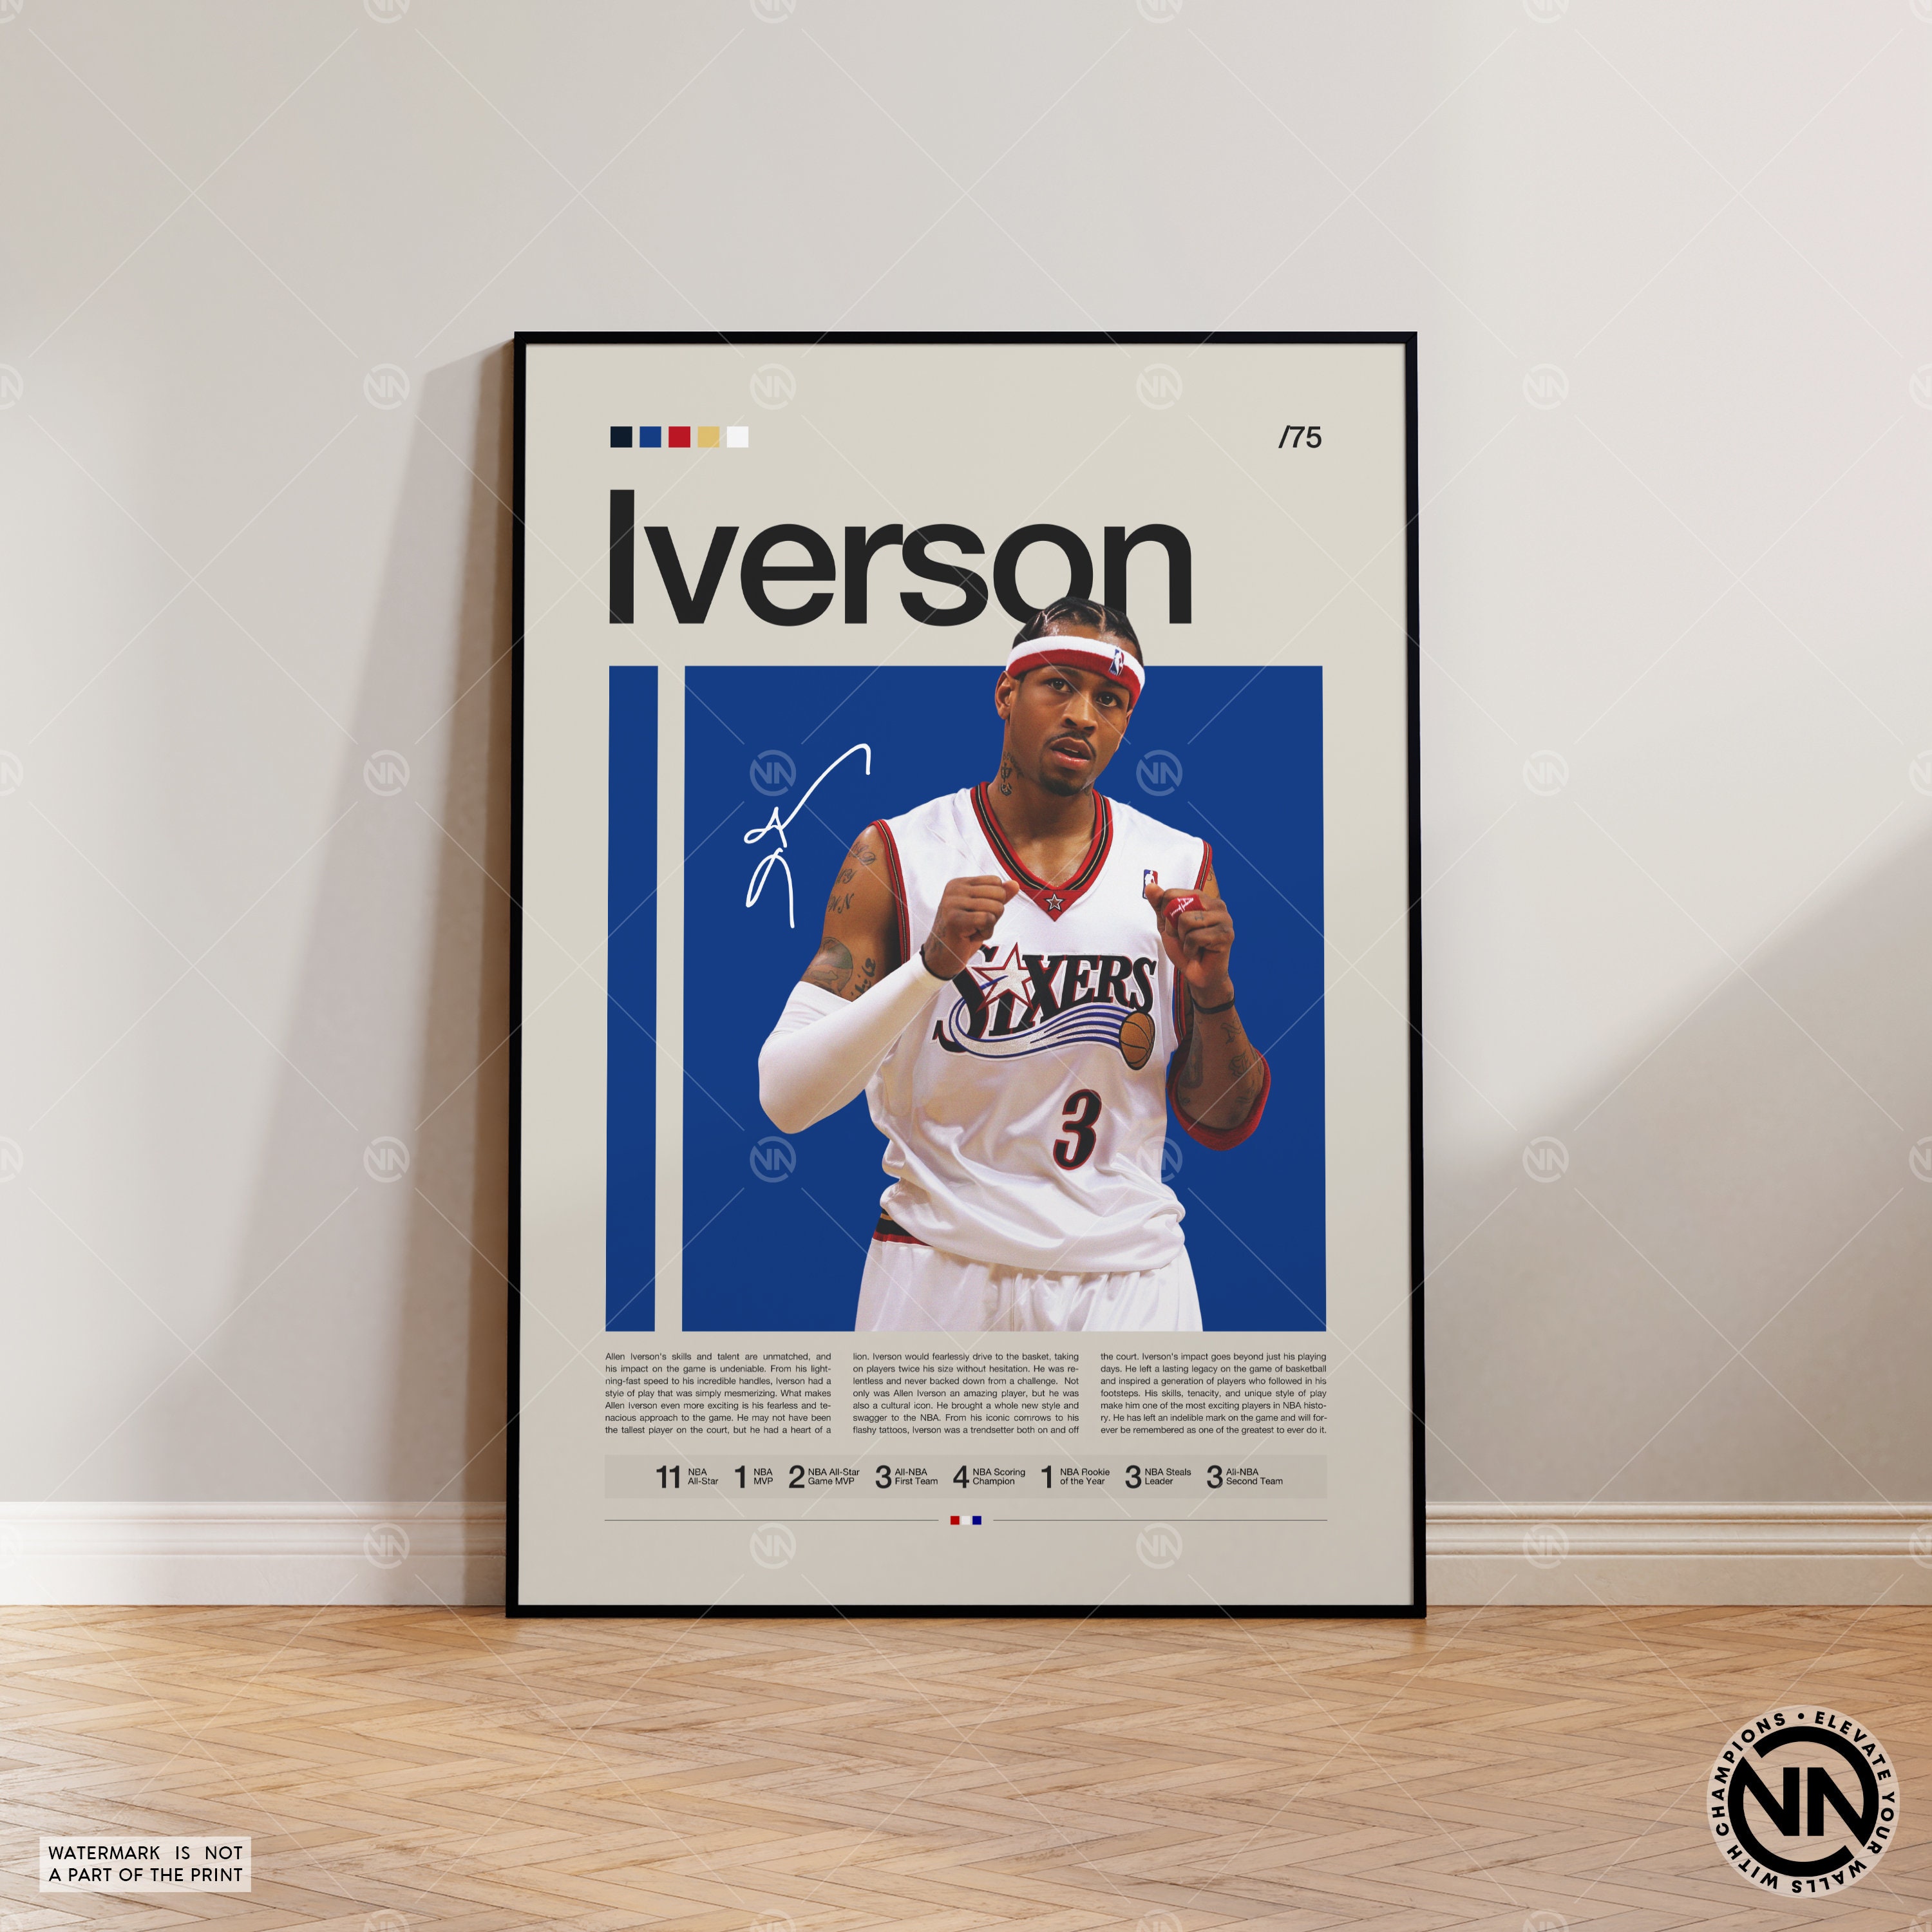 Allen Iverson Jersey History Poster for Sale by WalkDesigns